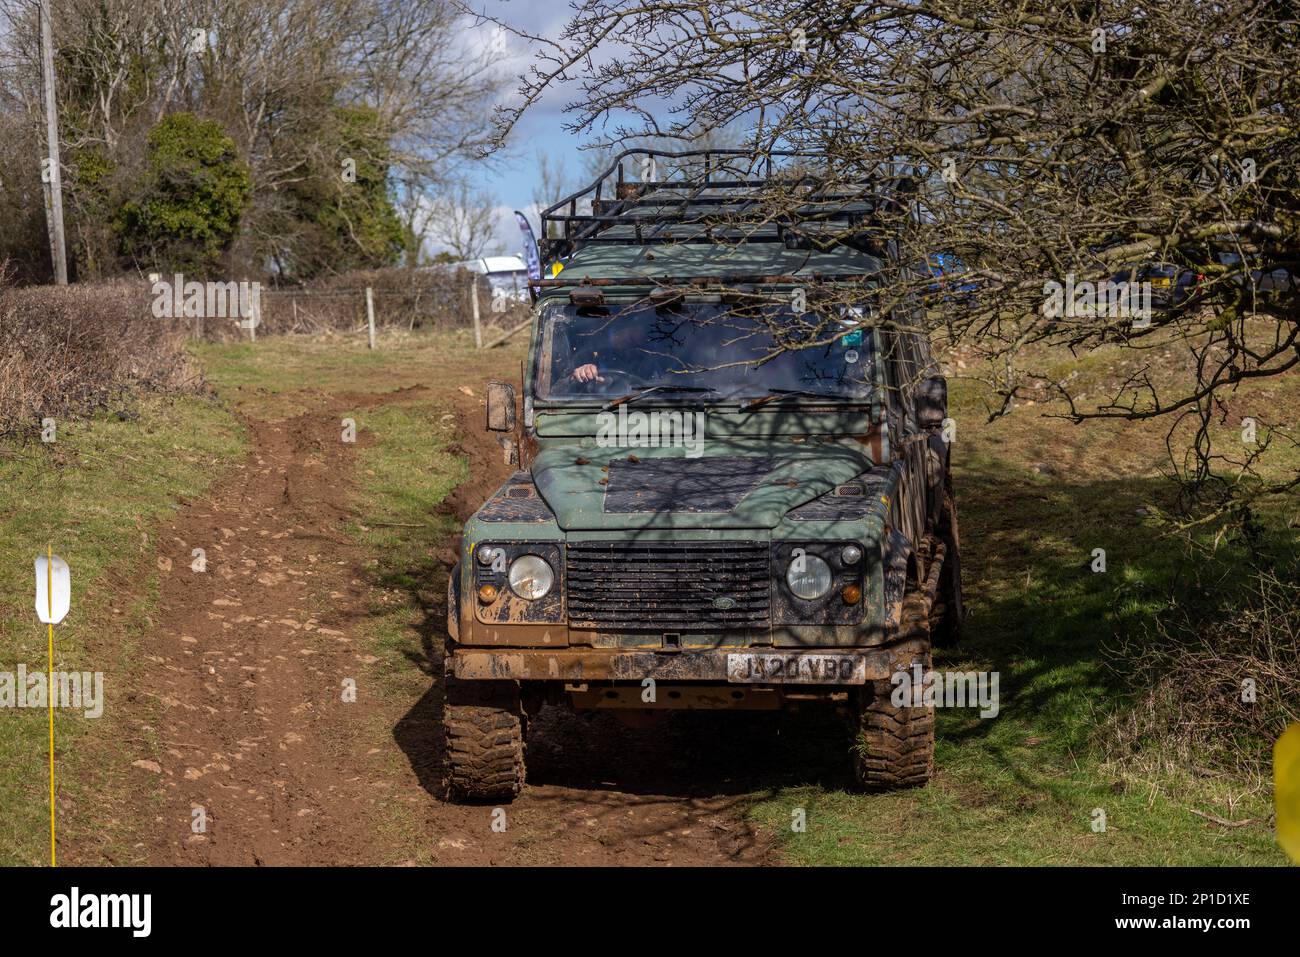 February 2023 - Land Rover Defender 90 taking part in an ADWC off road trial at Chewton Mendip in Somerset, UK. Stock Photo